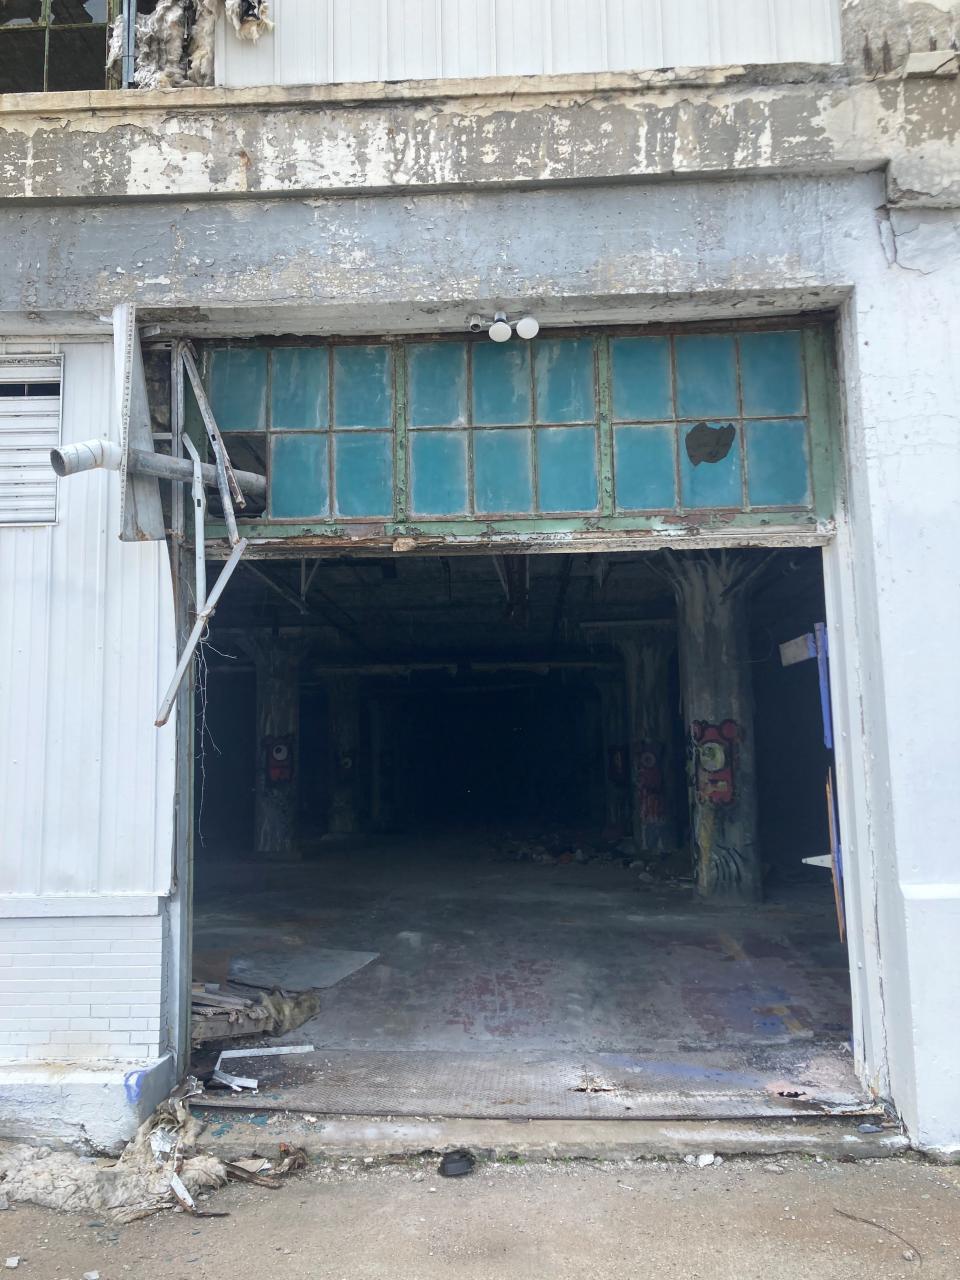 Developers plan to soon secure this and other open entrances to the old Fisher Body Plant No. 21.